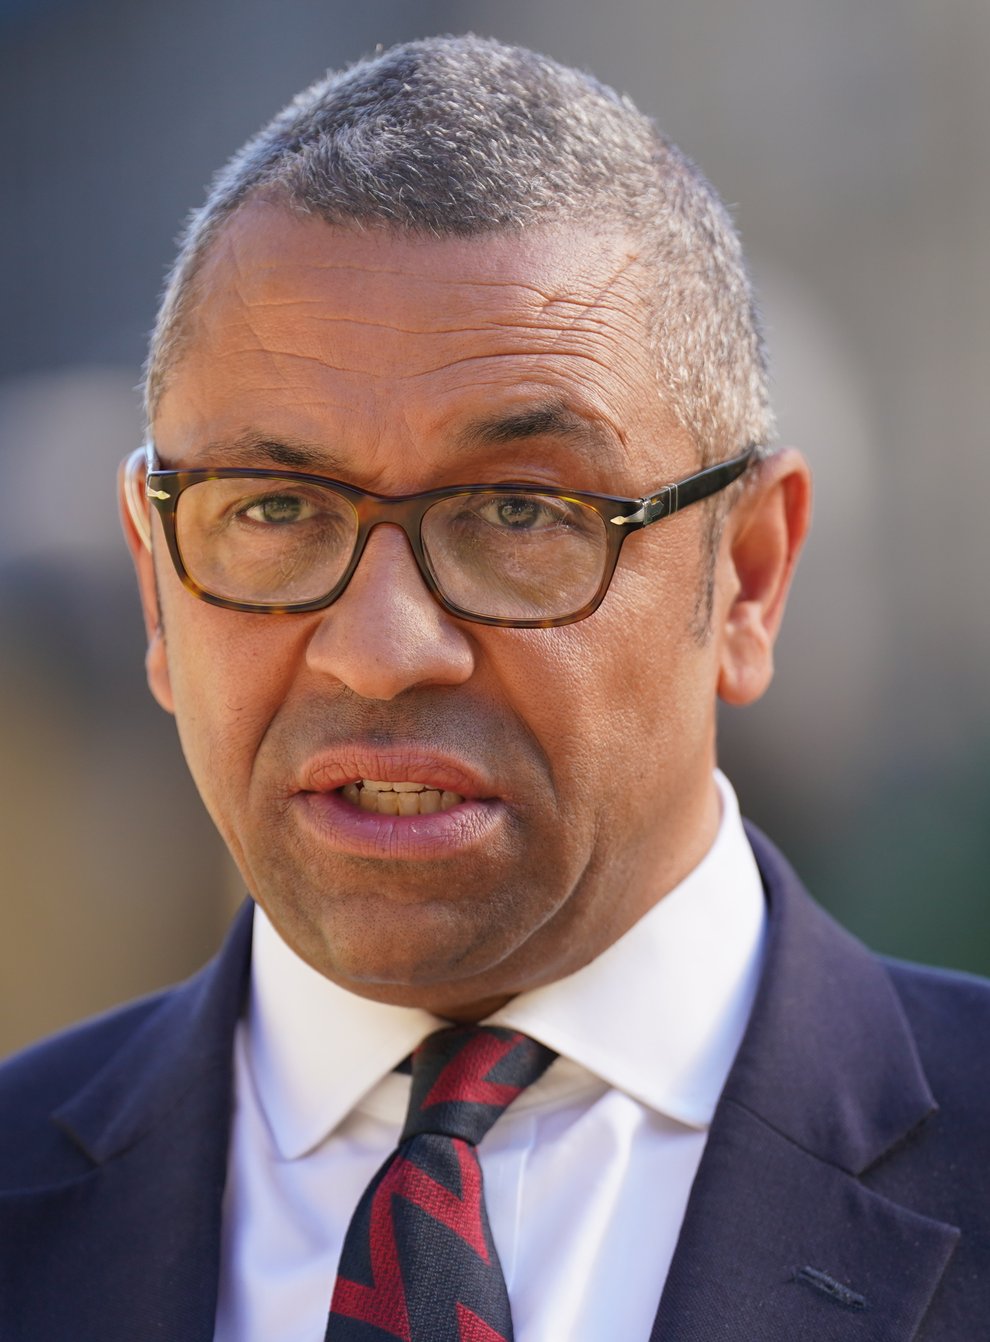 James Cleverly, the Education Secretary, giving media interview on College Green, outside the Houses of Parliament (Kirsty O’Connor/PA)